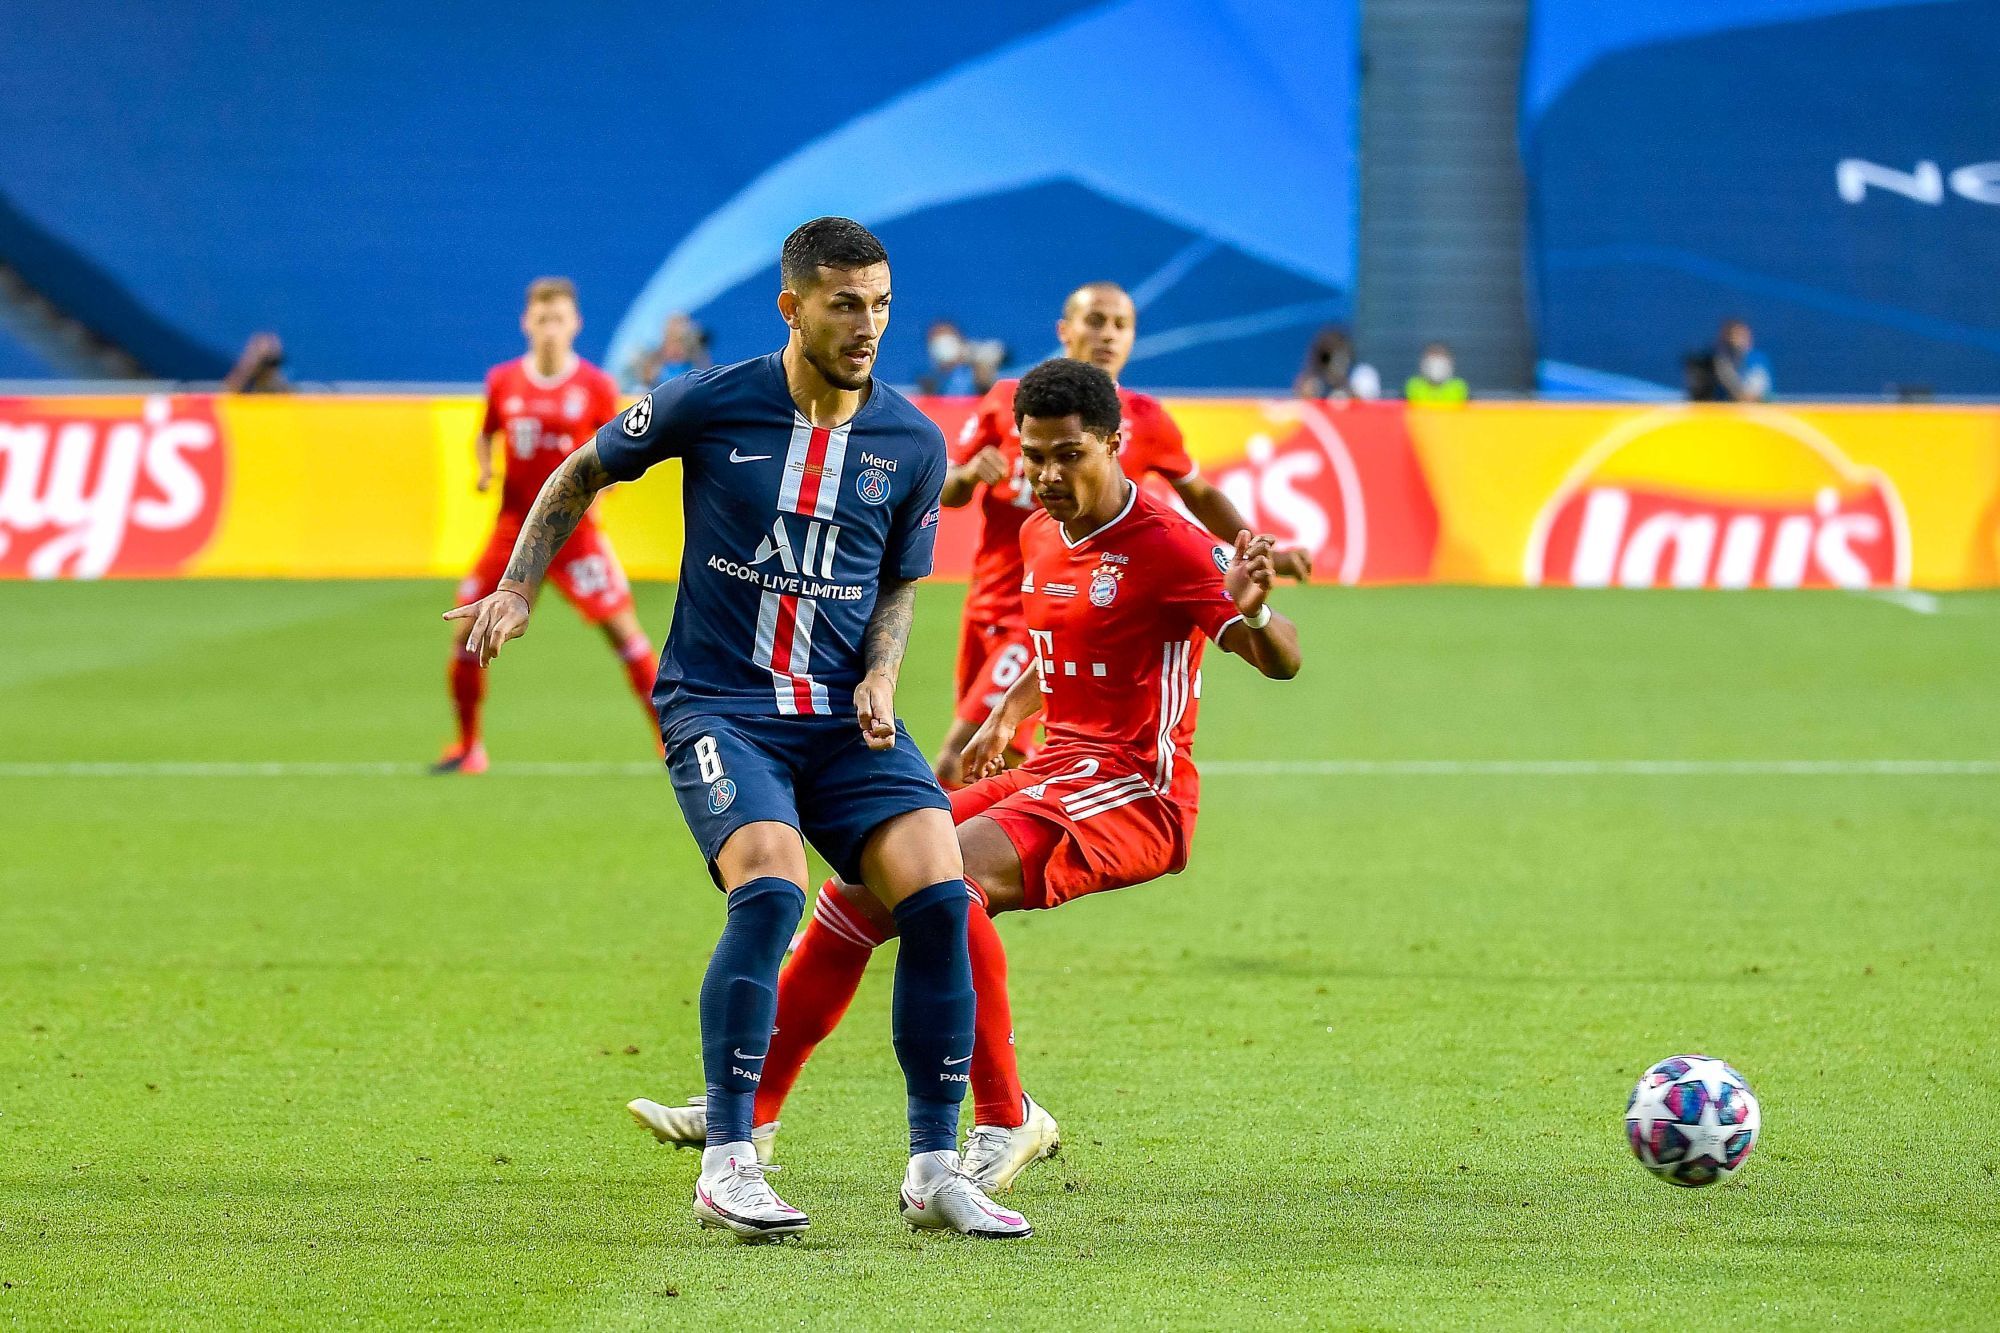 Serge GNABRY r. (M) gegen Leandro PAREDES (PSG), 
Fussball Champions League, Finale, FC Bayern Muenchen (M) - Paris St. Germain (PSG), am 23.08.2020 im Estadio da Luz in Lissabon/ Portugal. 
FOTO: Frank Hoermann/ SVEN SIMON/ Pool, via Sascha Walther/Eibner-Pressefoto 
#NO use of any use photographs as image sequences and/or quasi-video#
#Editorial Use ONLY#
#National and International News Agencies OUT# | usage worldwide 


Photo by Icon Sport - Leandro PAREDES - Serge GNABRY - Estàdio da Luz - Lisbonne (Portugal)